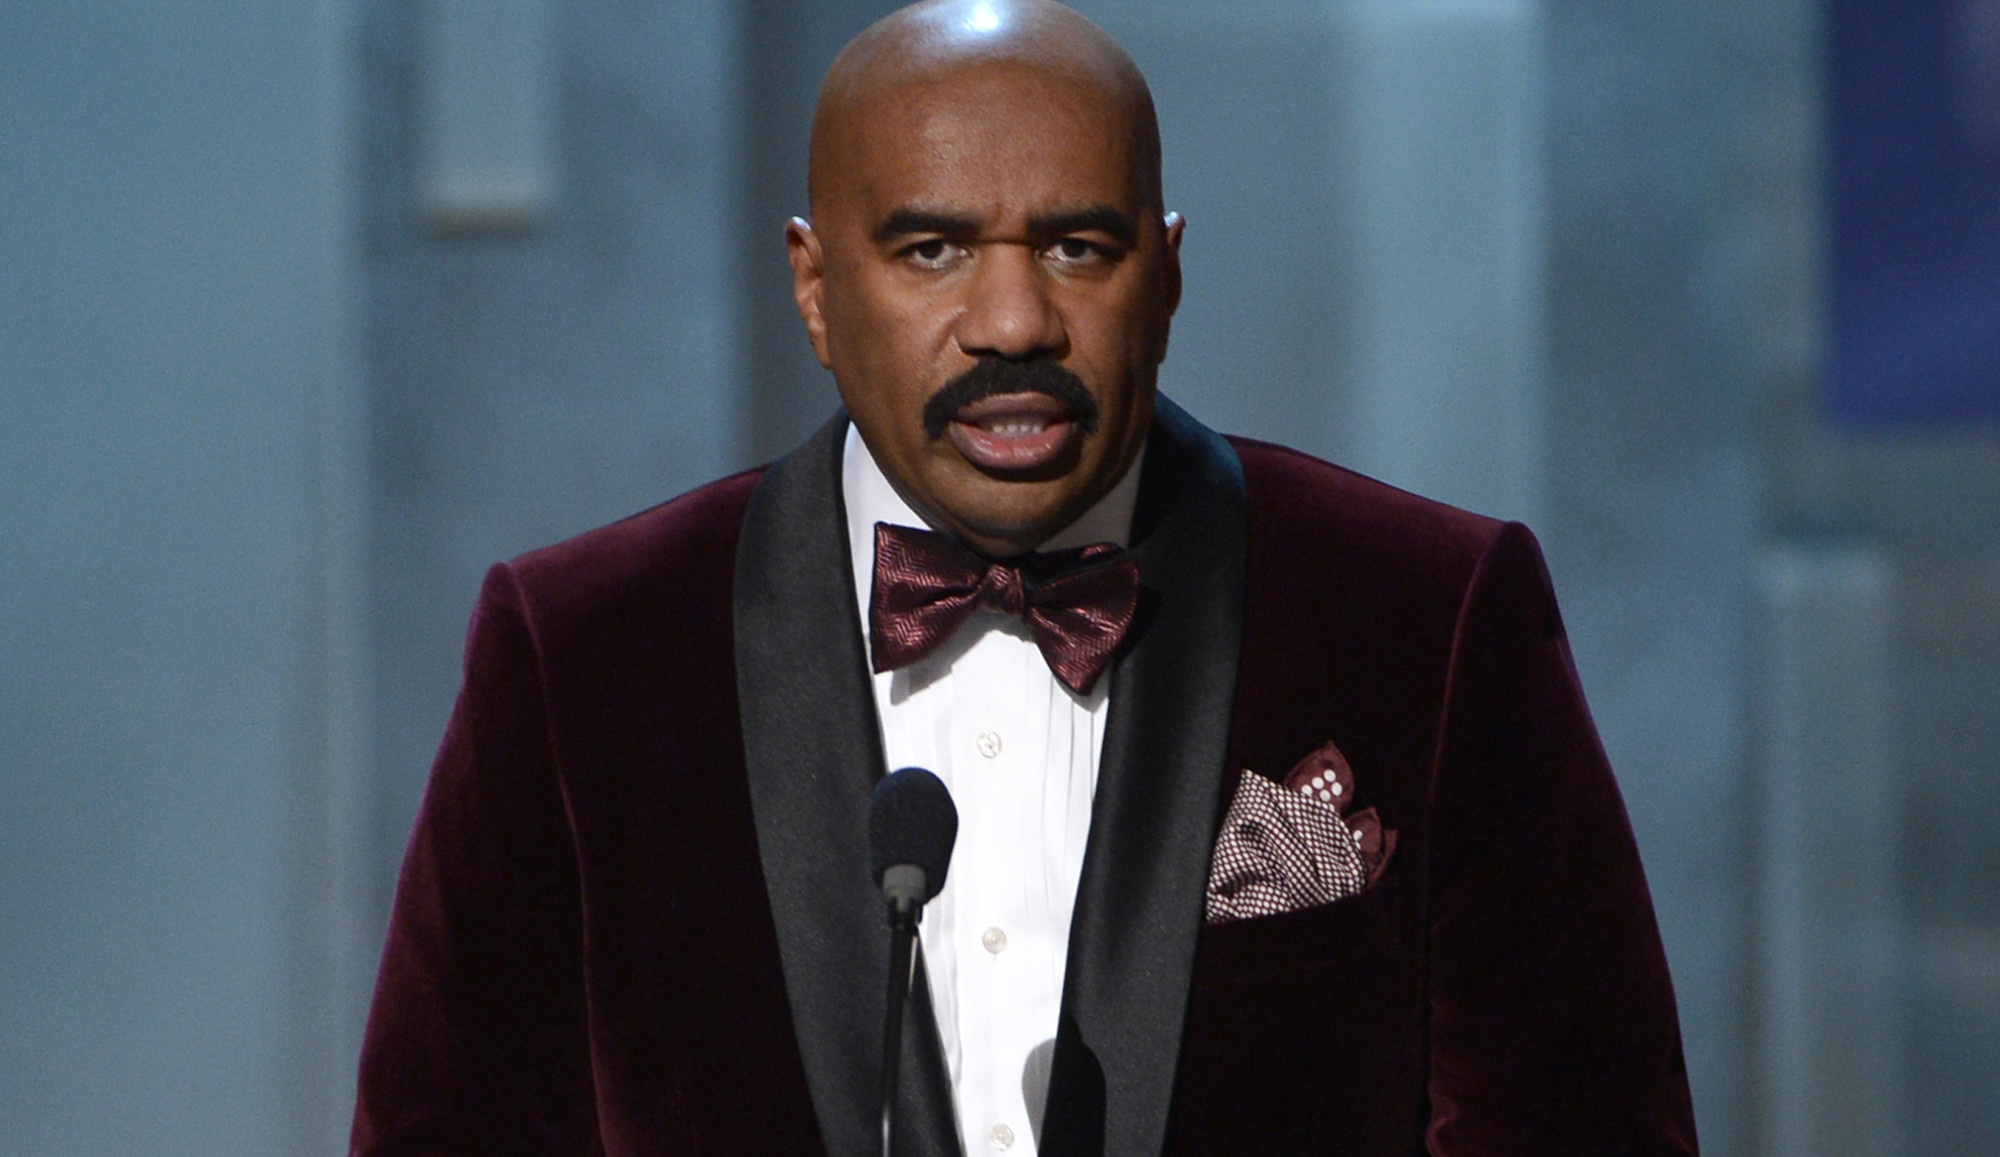 Before Steve Harvey made it, he was homeless for 3 years. During that time, he slept in his Ford Tempo and survived on a diet consisting mainly of bologna sandwiches.